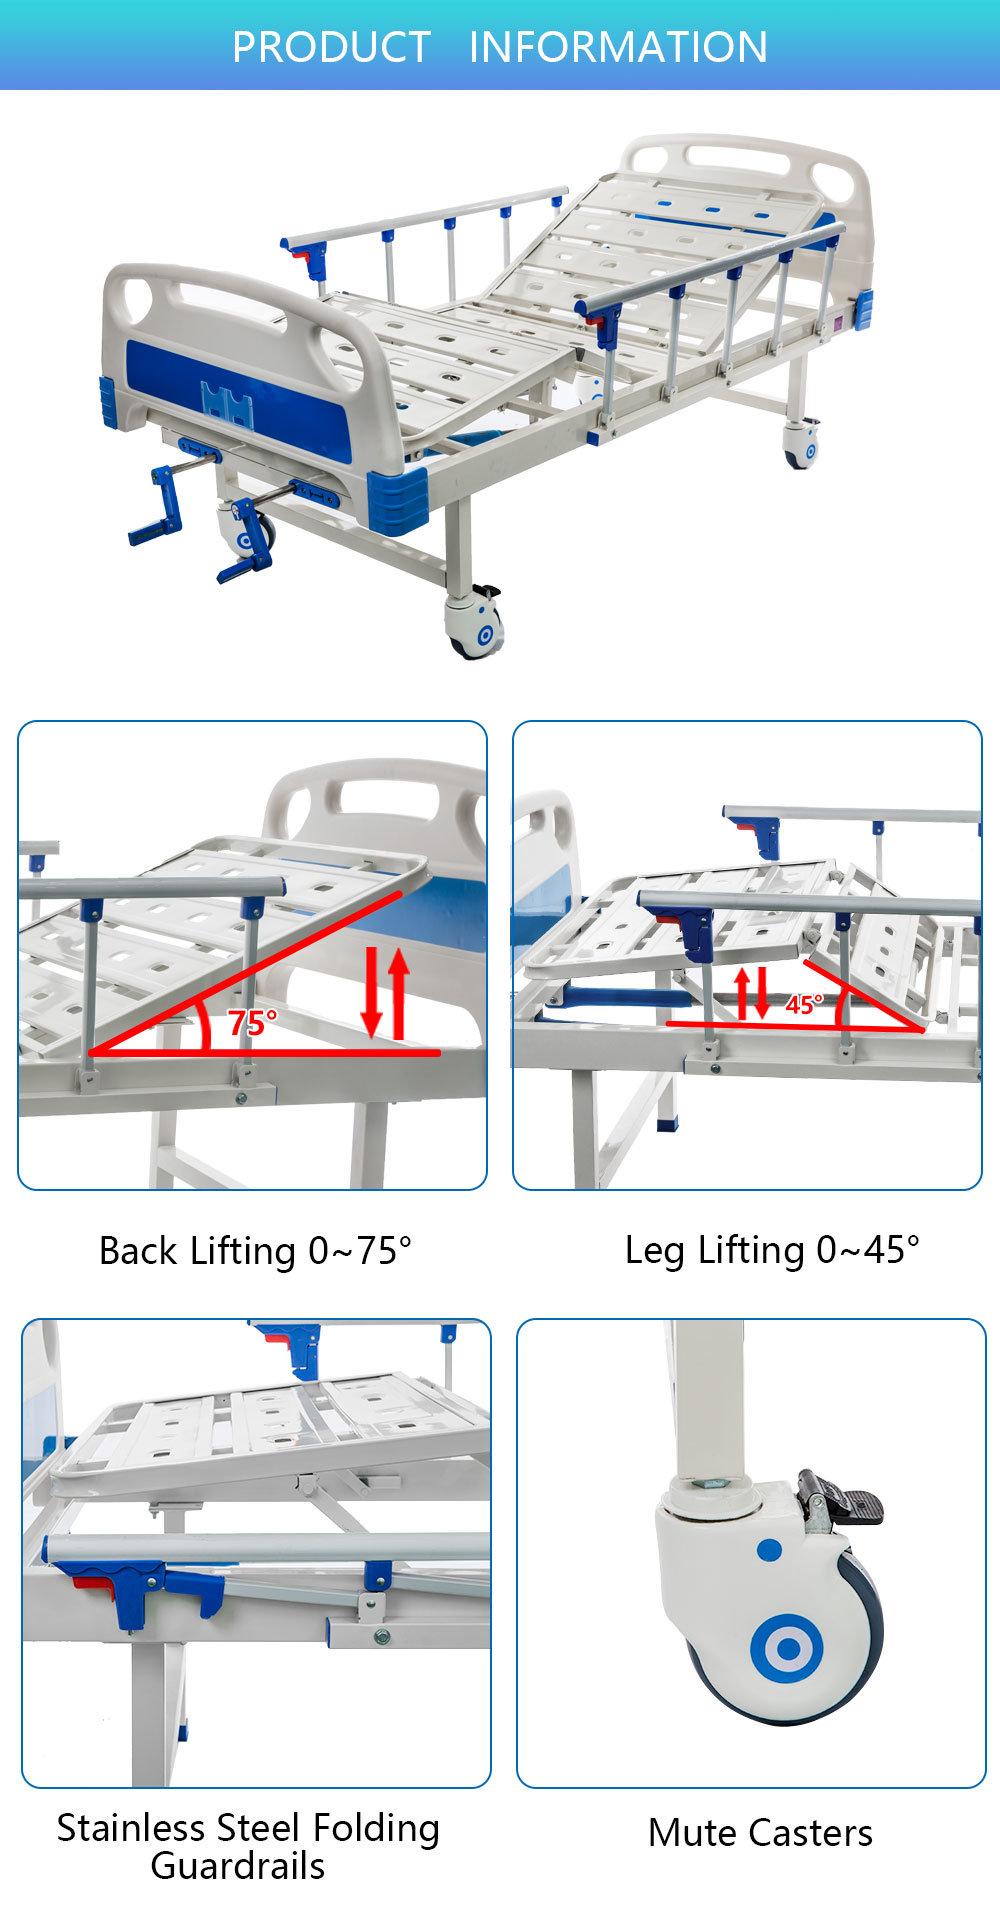 ABS Crank 2 Function Medical Hospital Bed B07-1A